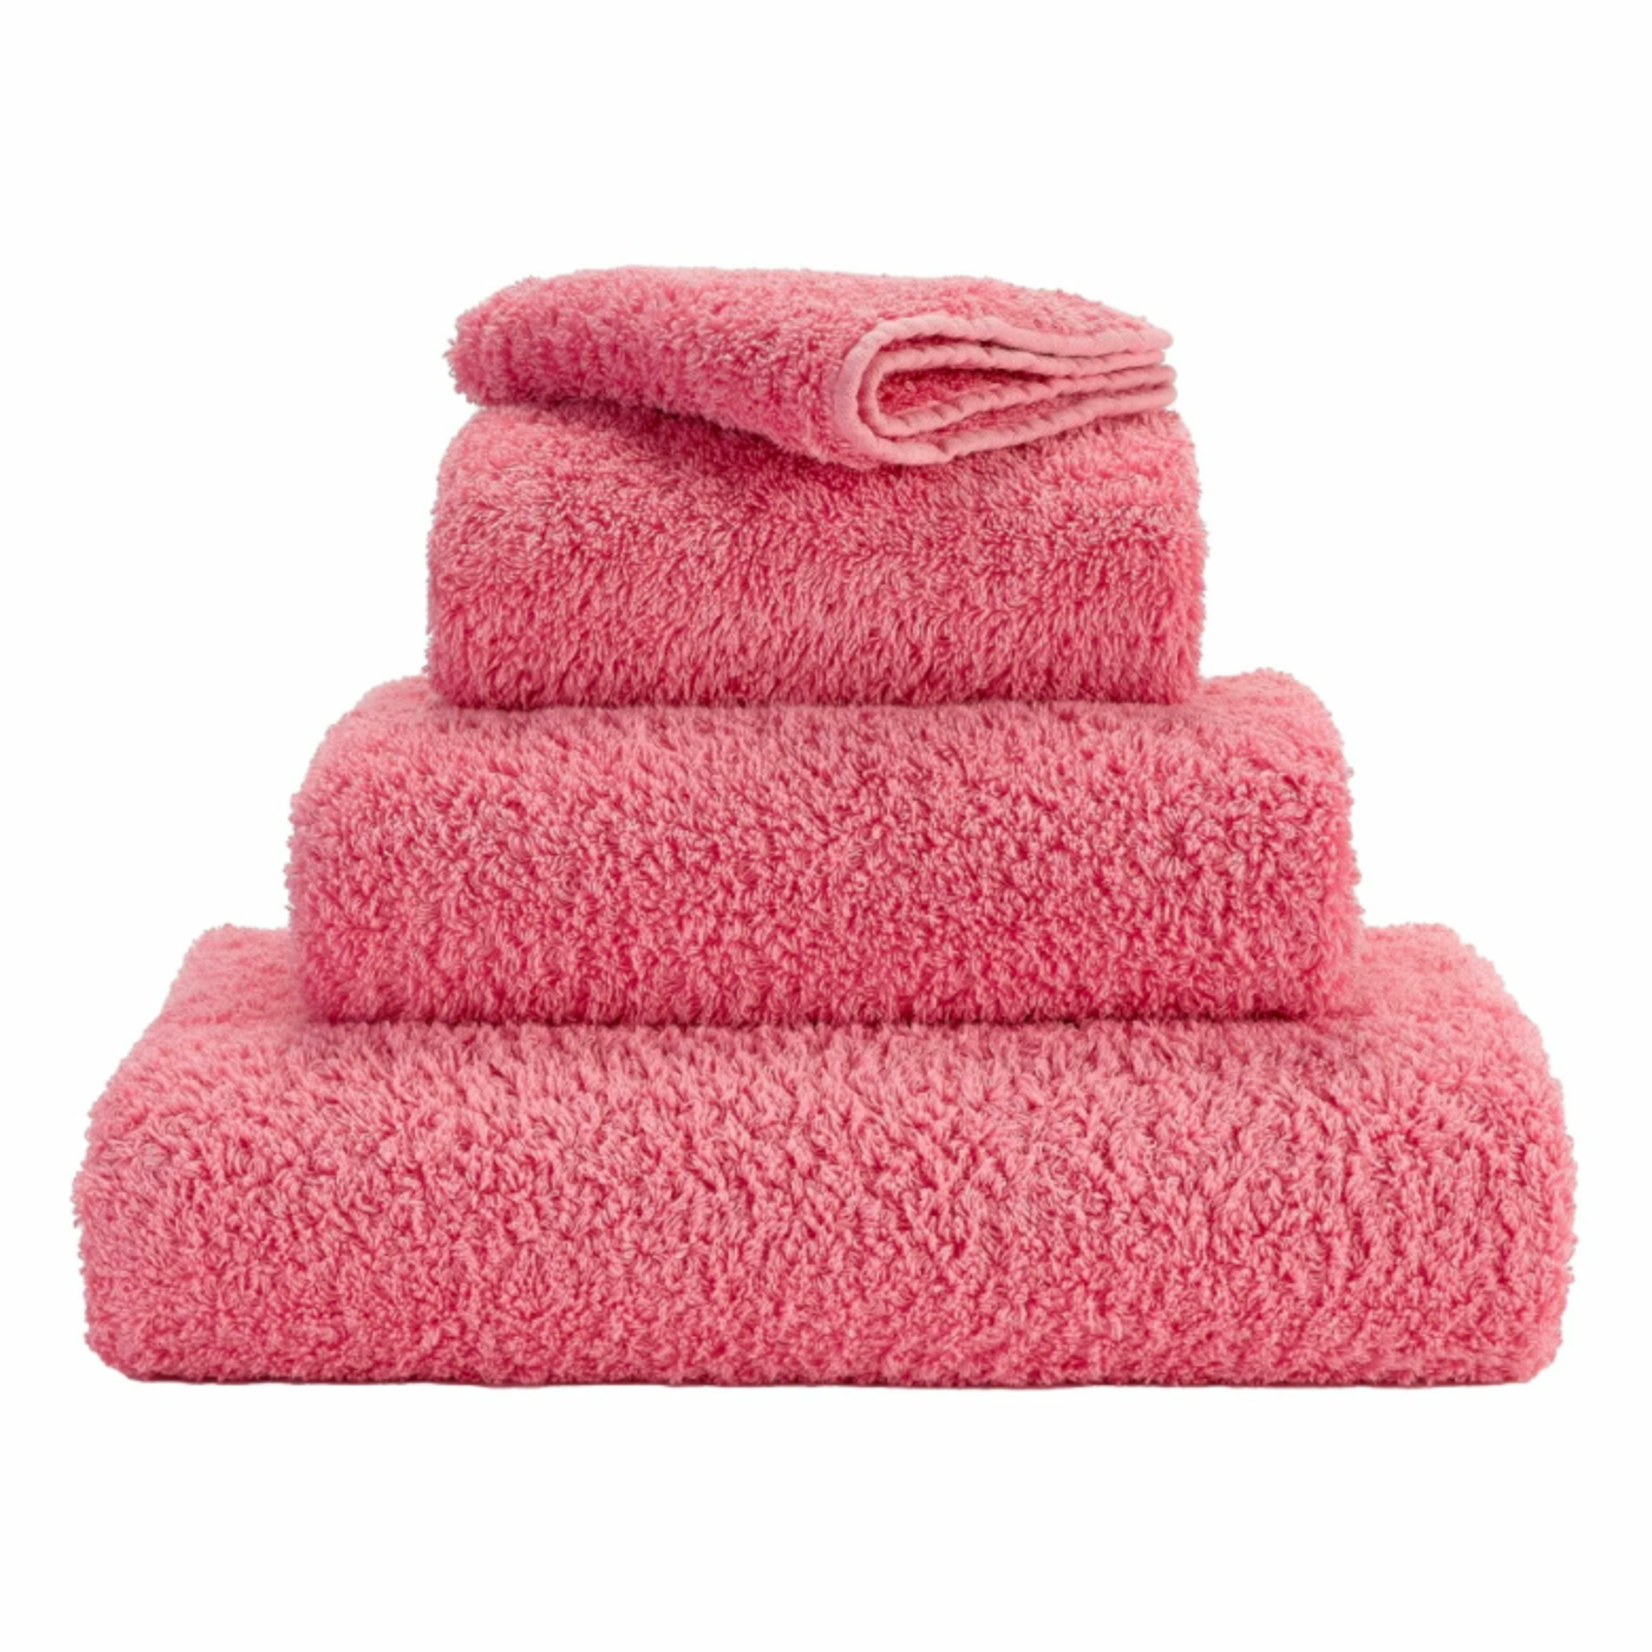 Abyss Abyss Super Pile Towels 573 Flamingo